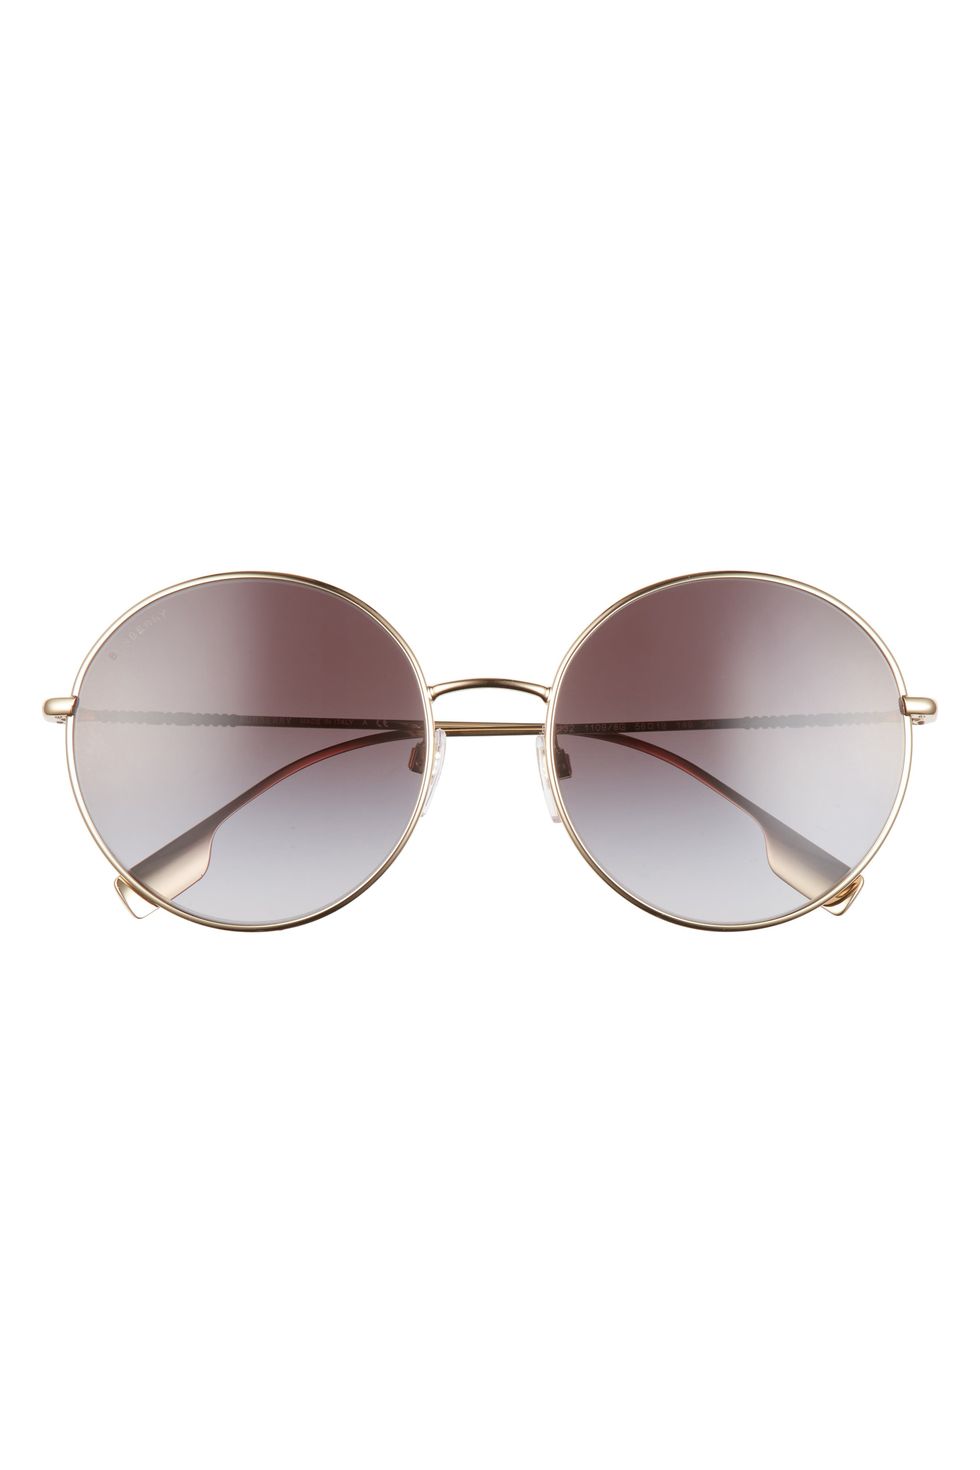 The Weekly Covet: Stylish Sunglasses for Summer and Beyond